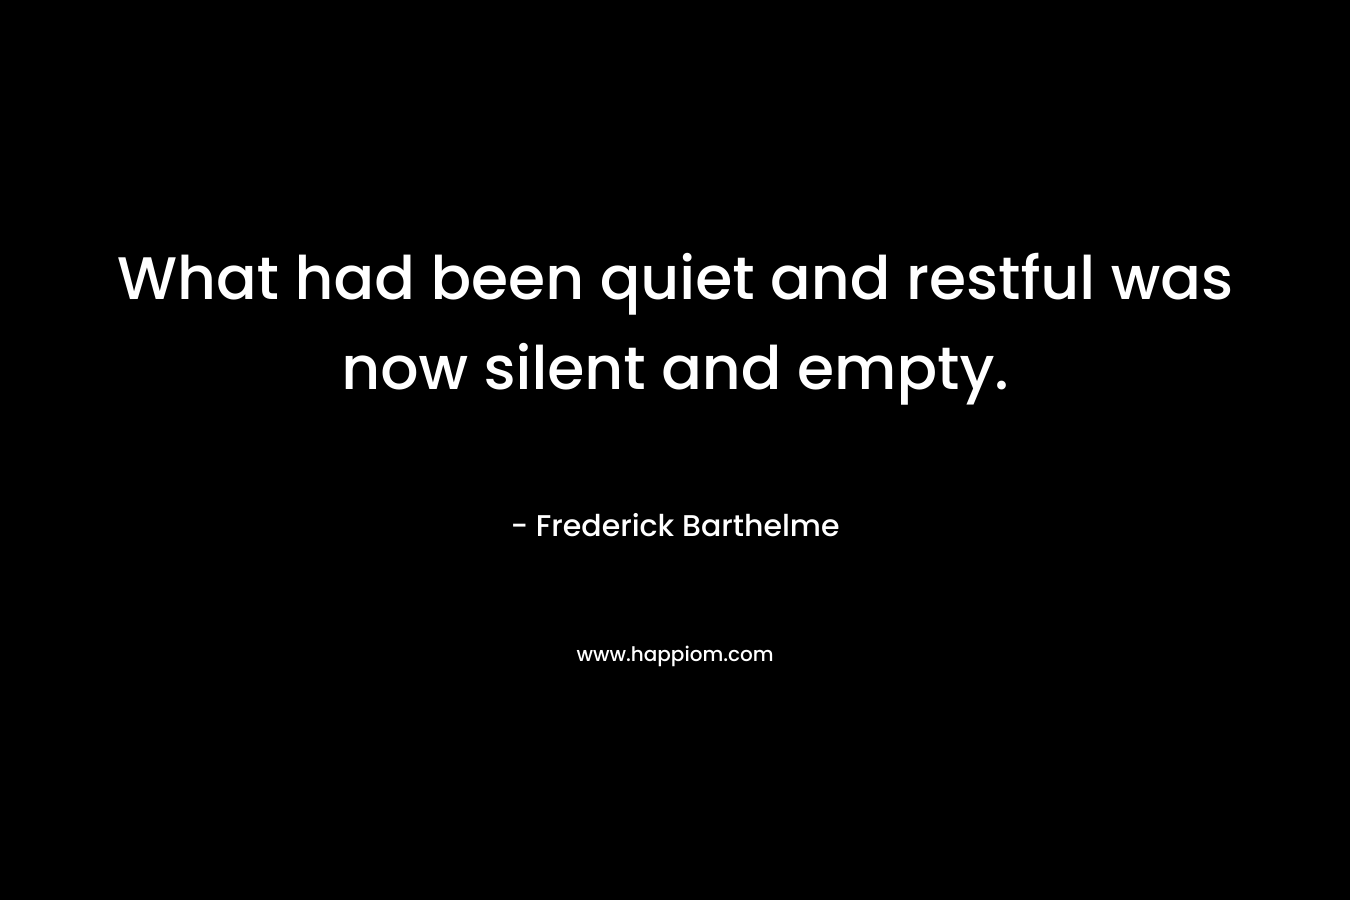 What had been quiet and restful was now silent and empty.